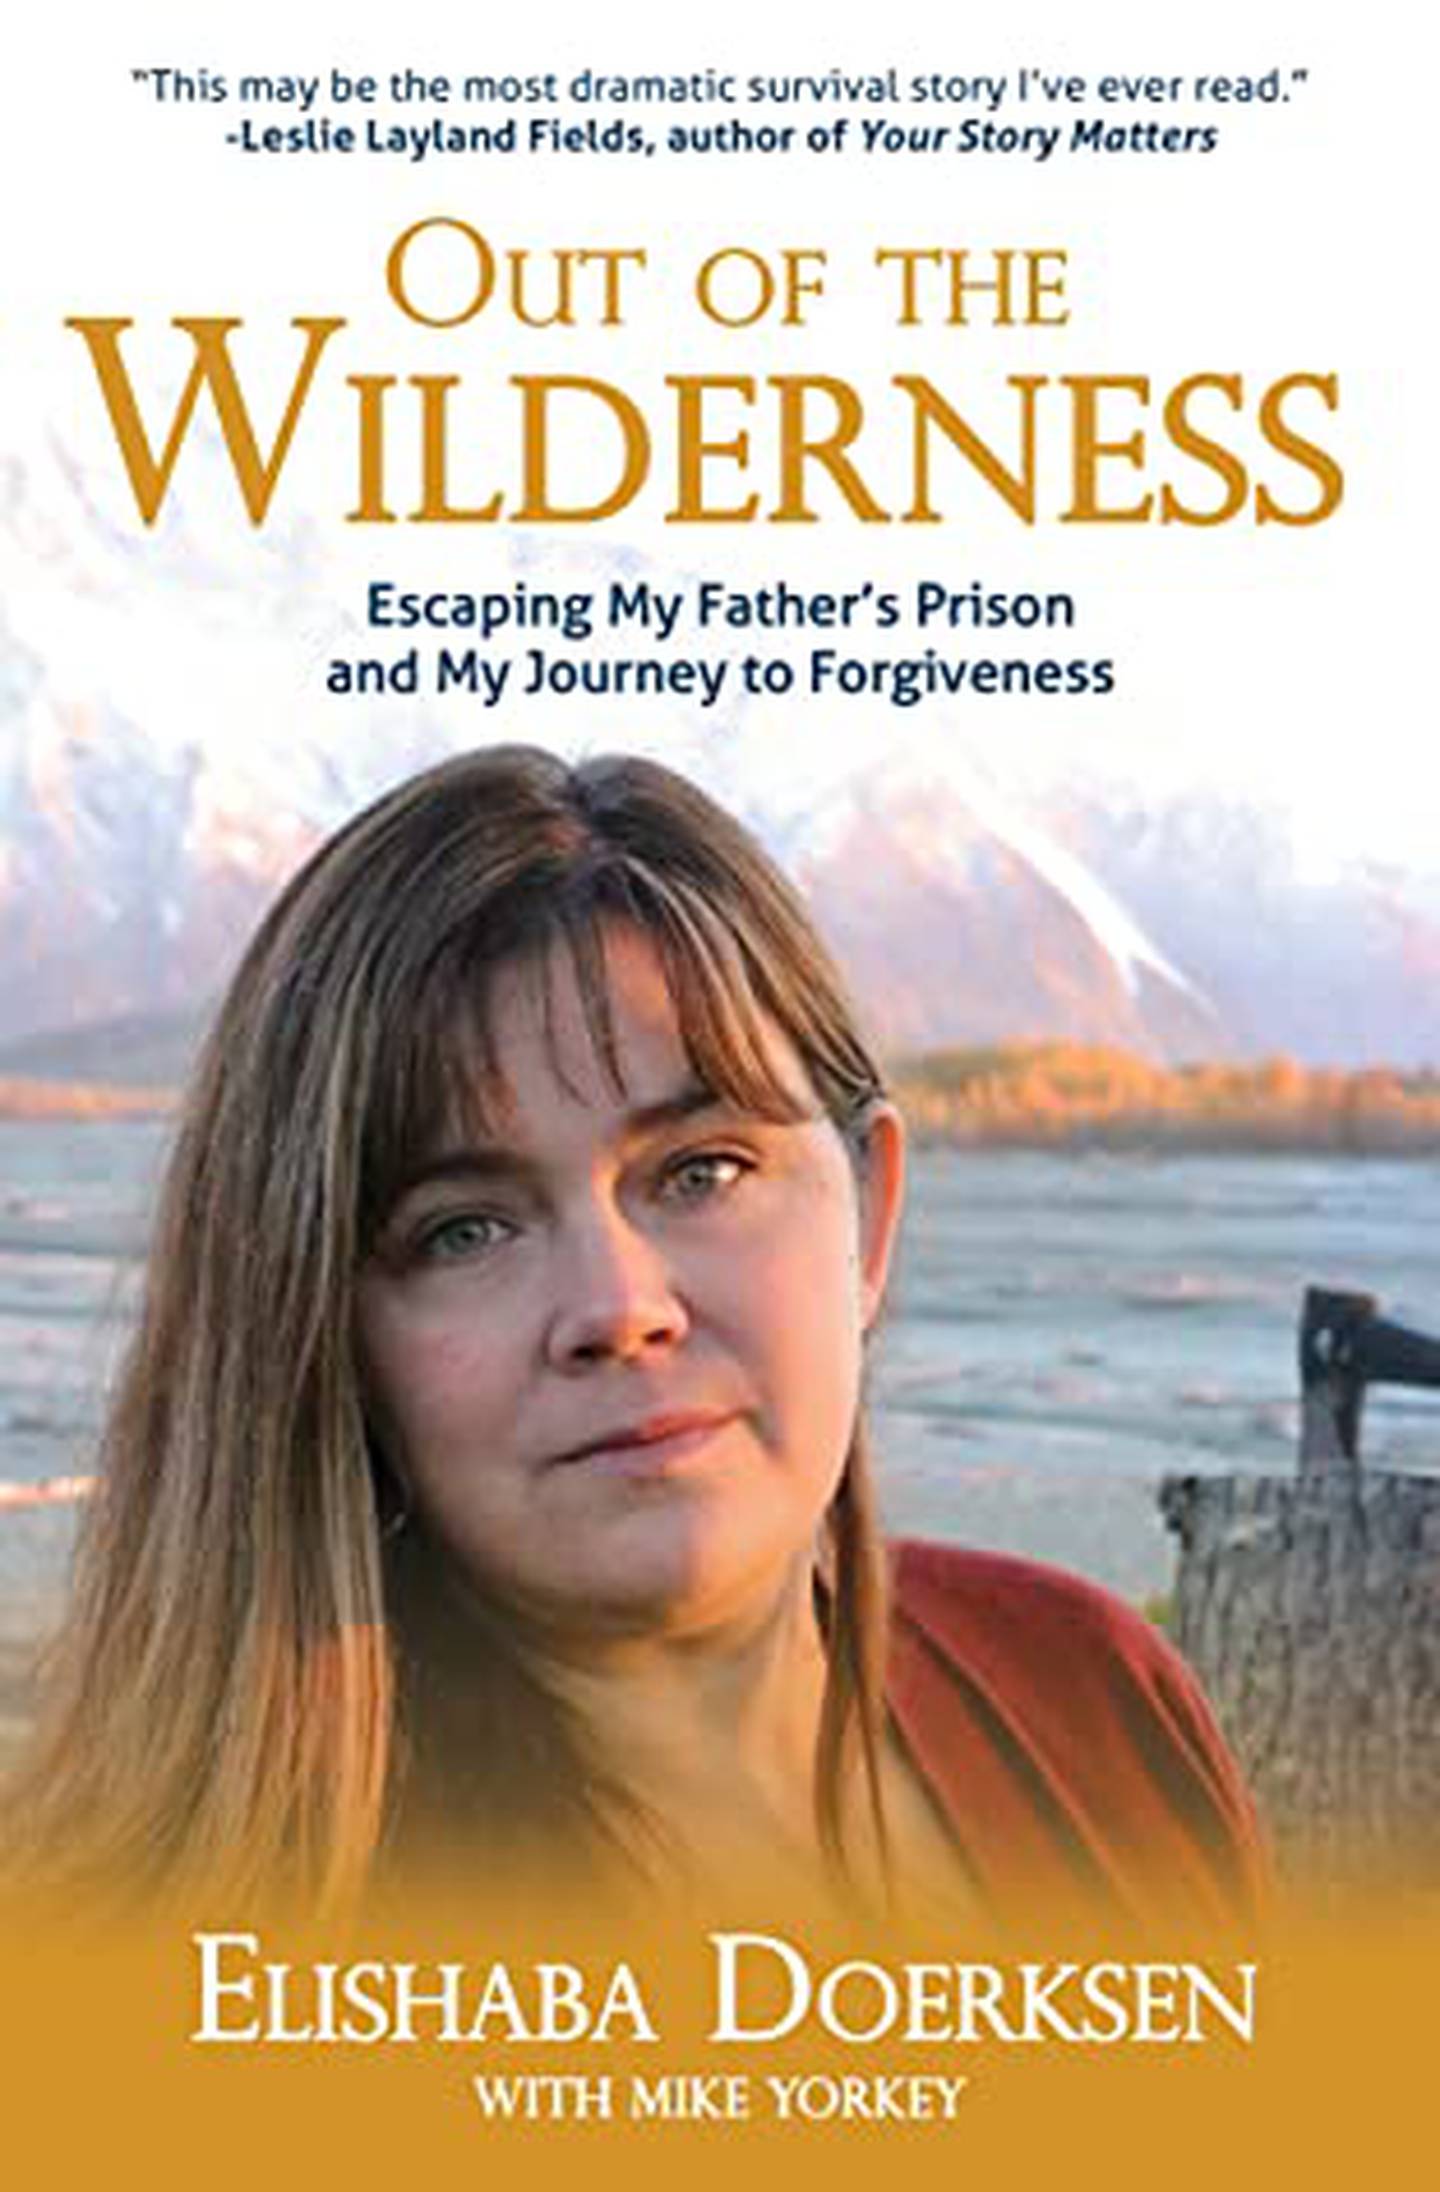 “Out of the Wilderness: Escaping My Father’s Prison and My Journey to Forgiveness”